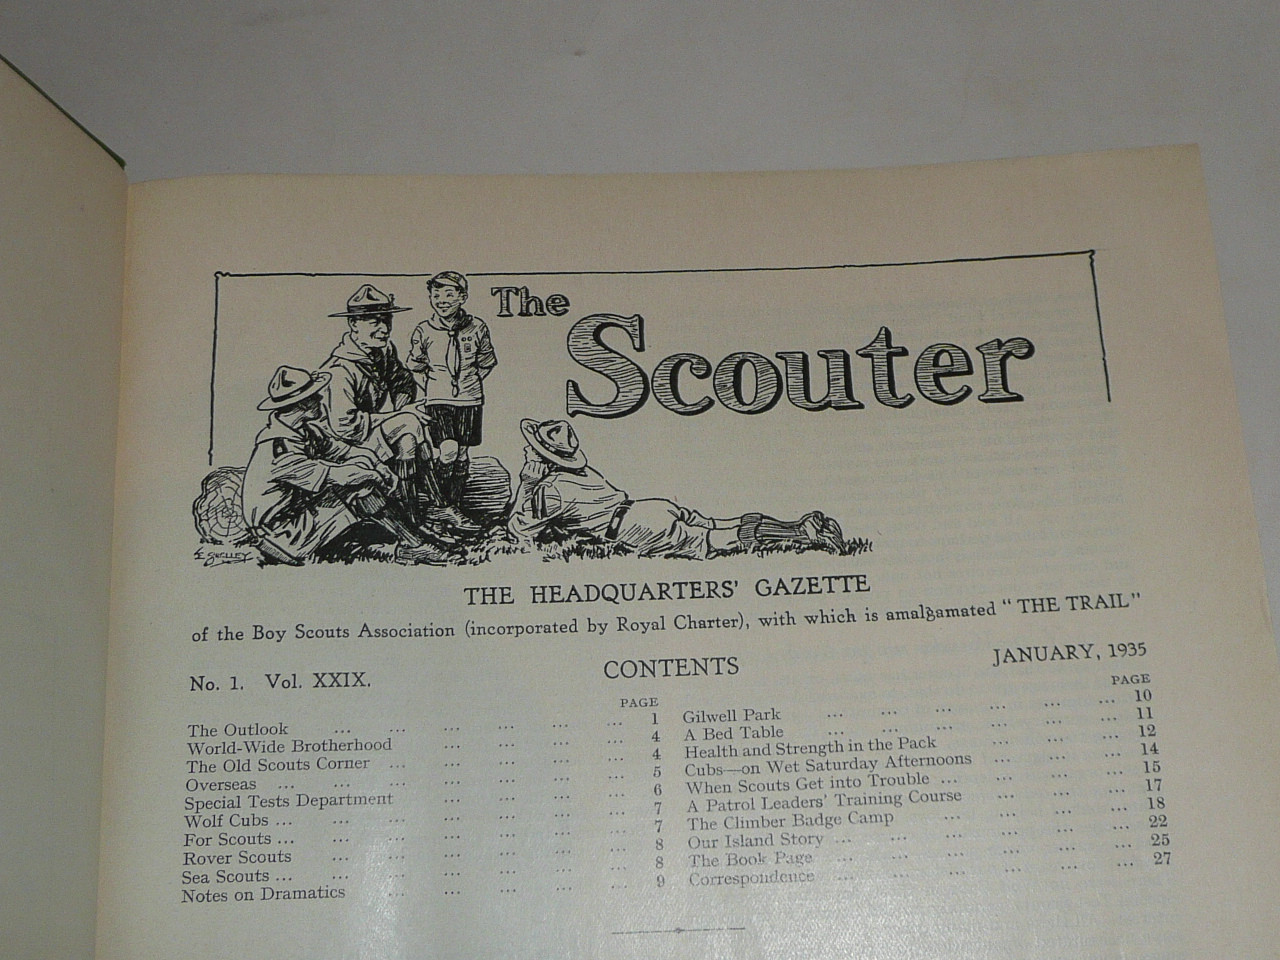 1935 Bound volume of "The Scouter", United Kingdom Scout Leader Magazine